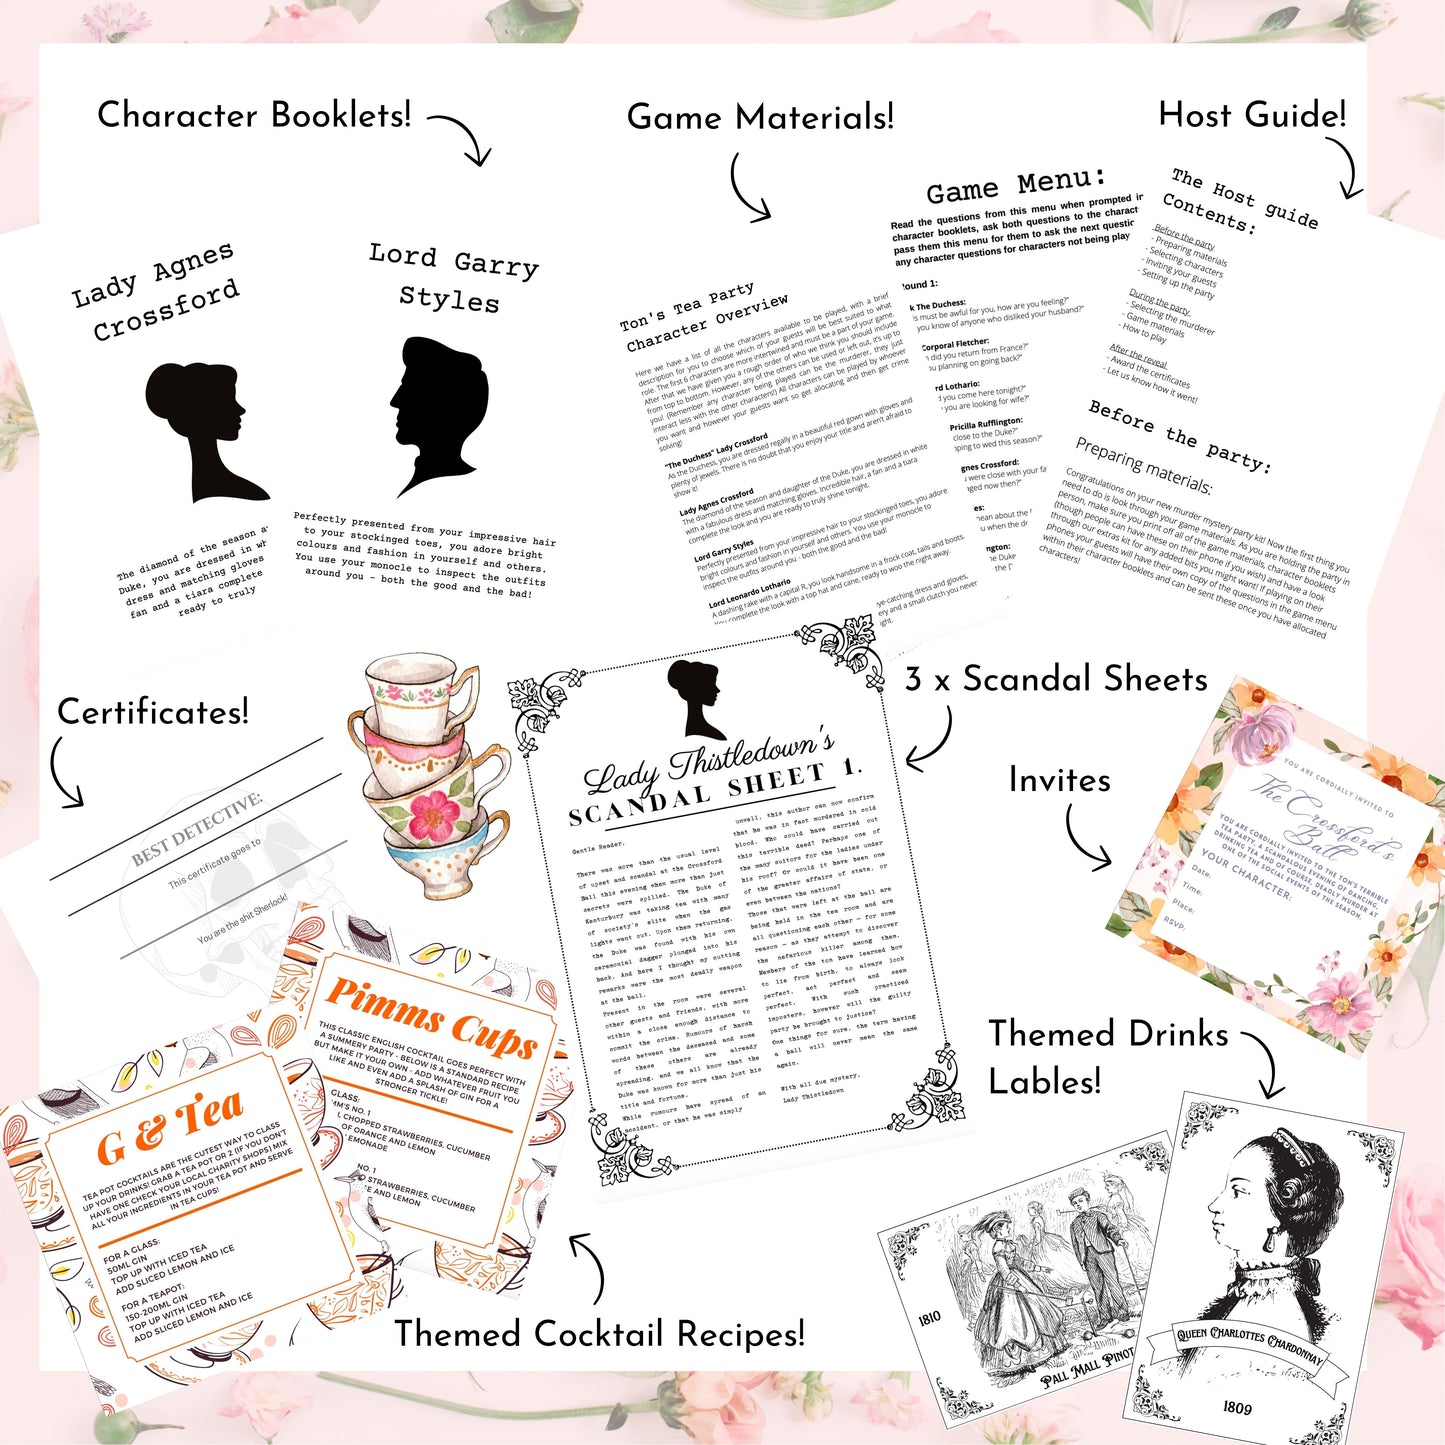 The Ton's Tea Party - A Bridgerton inspired Murder Mystery Party Game for 6-10 Players Instant Digital Download Zoom Edition